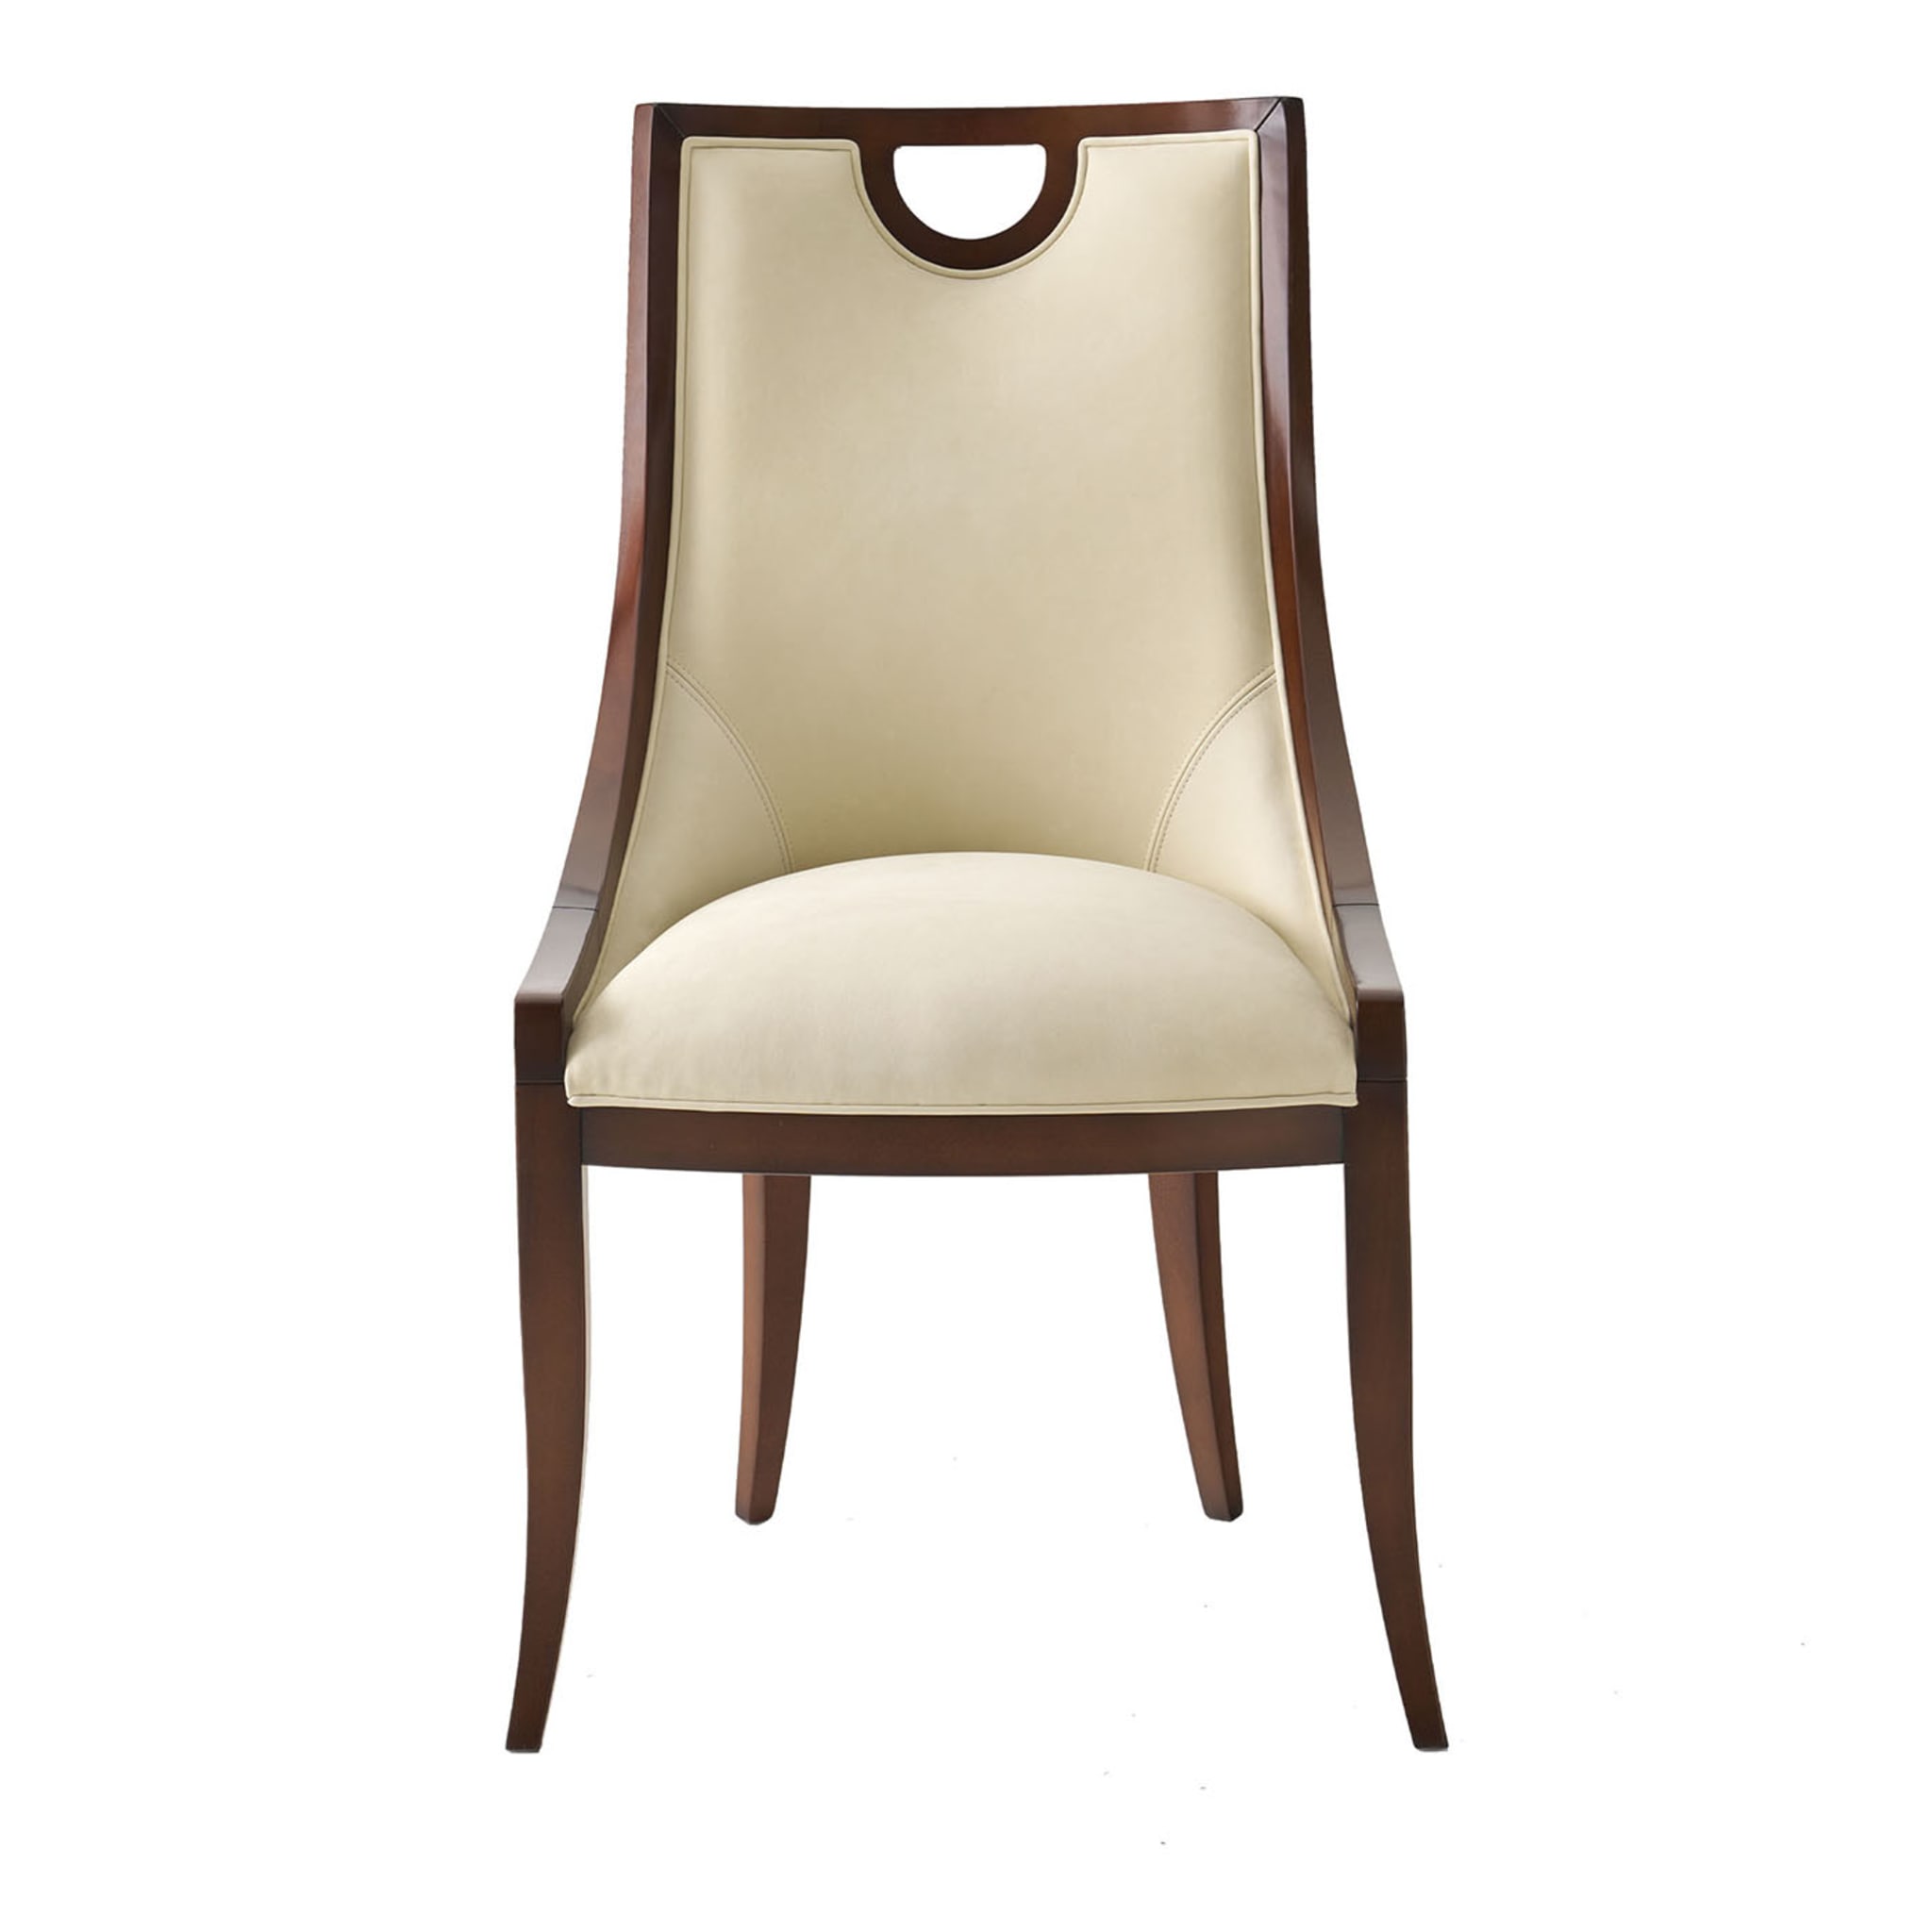 Tully Beige & Walnut Chair - Main view